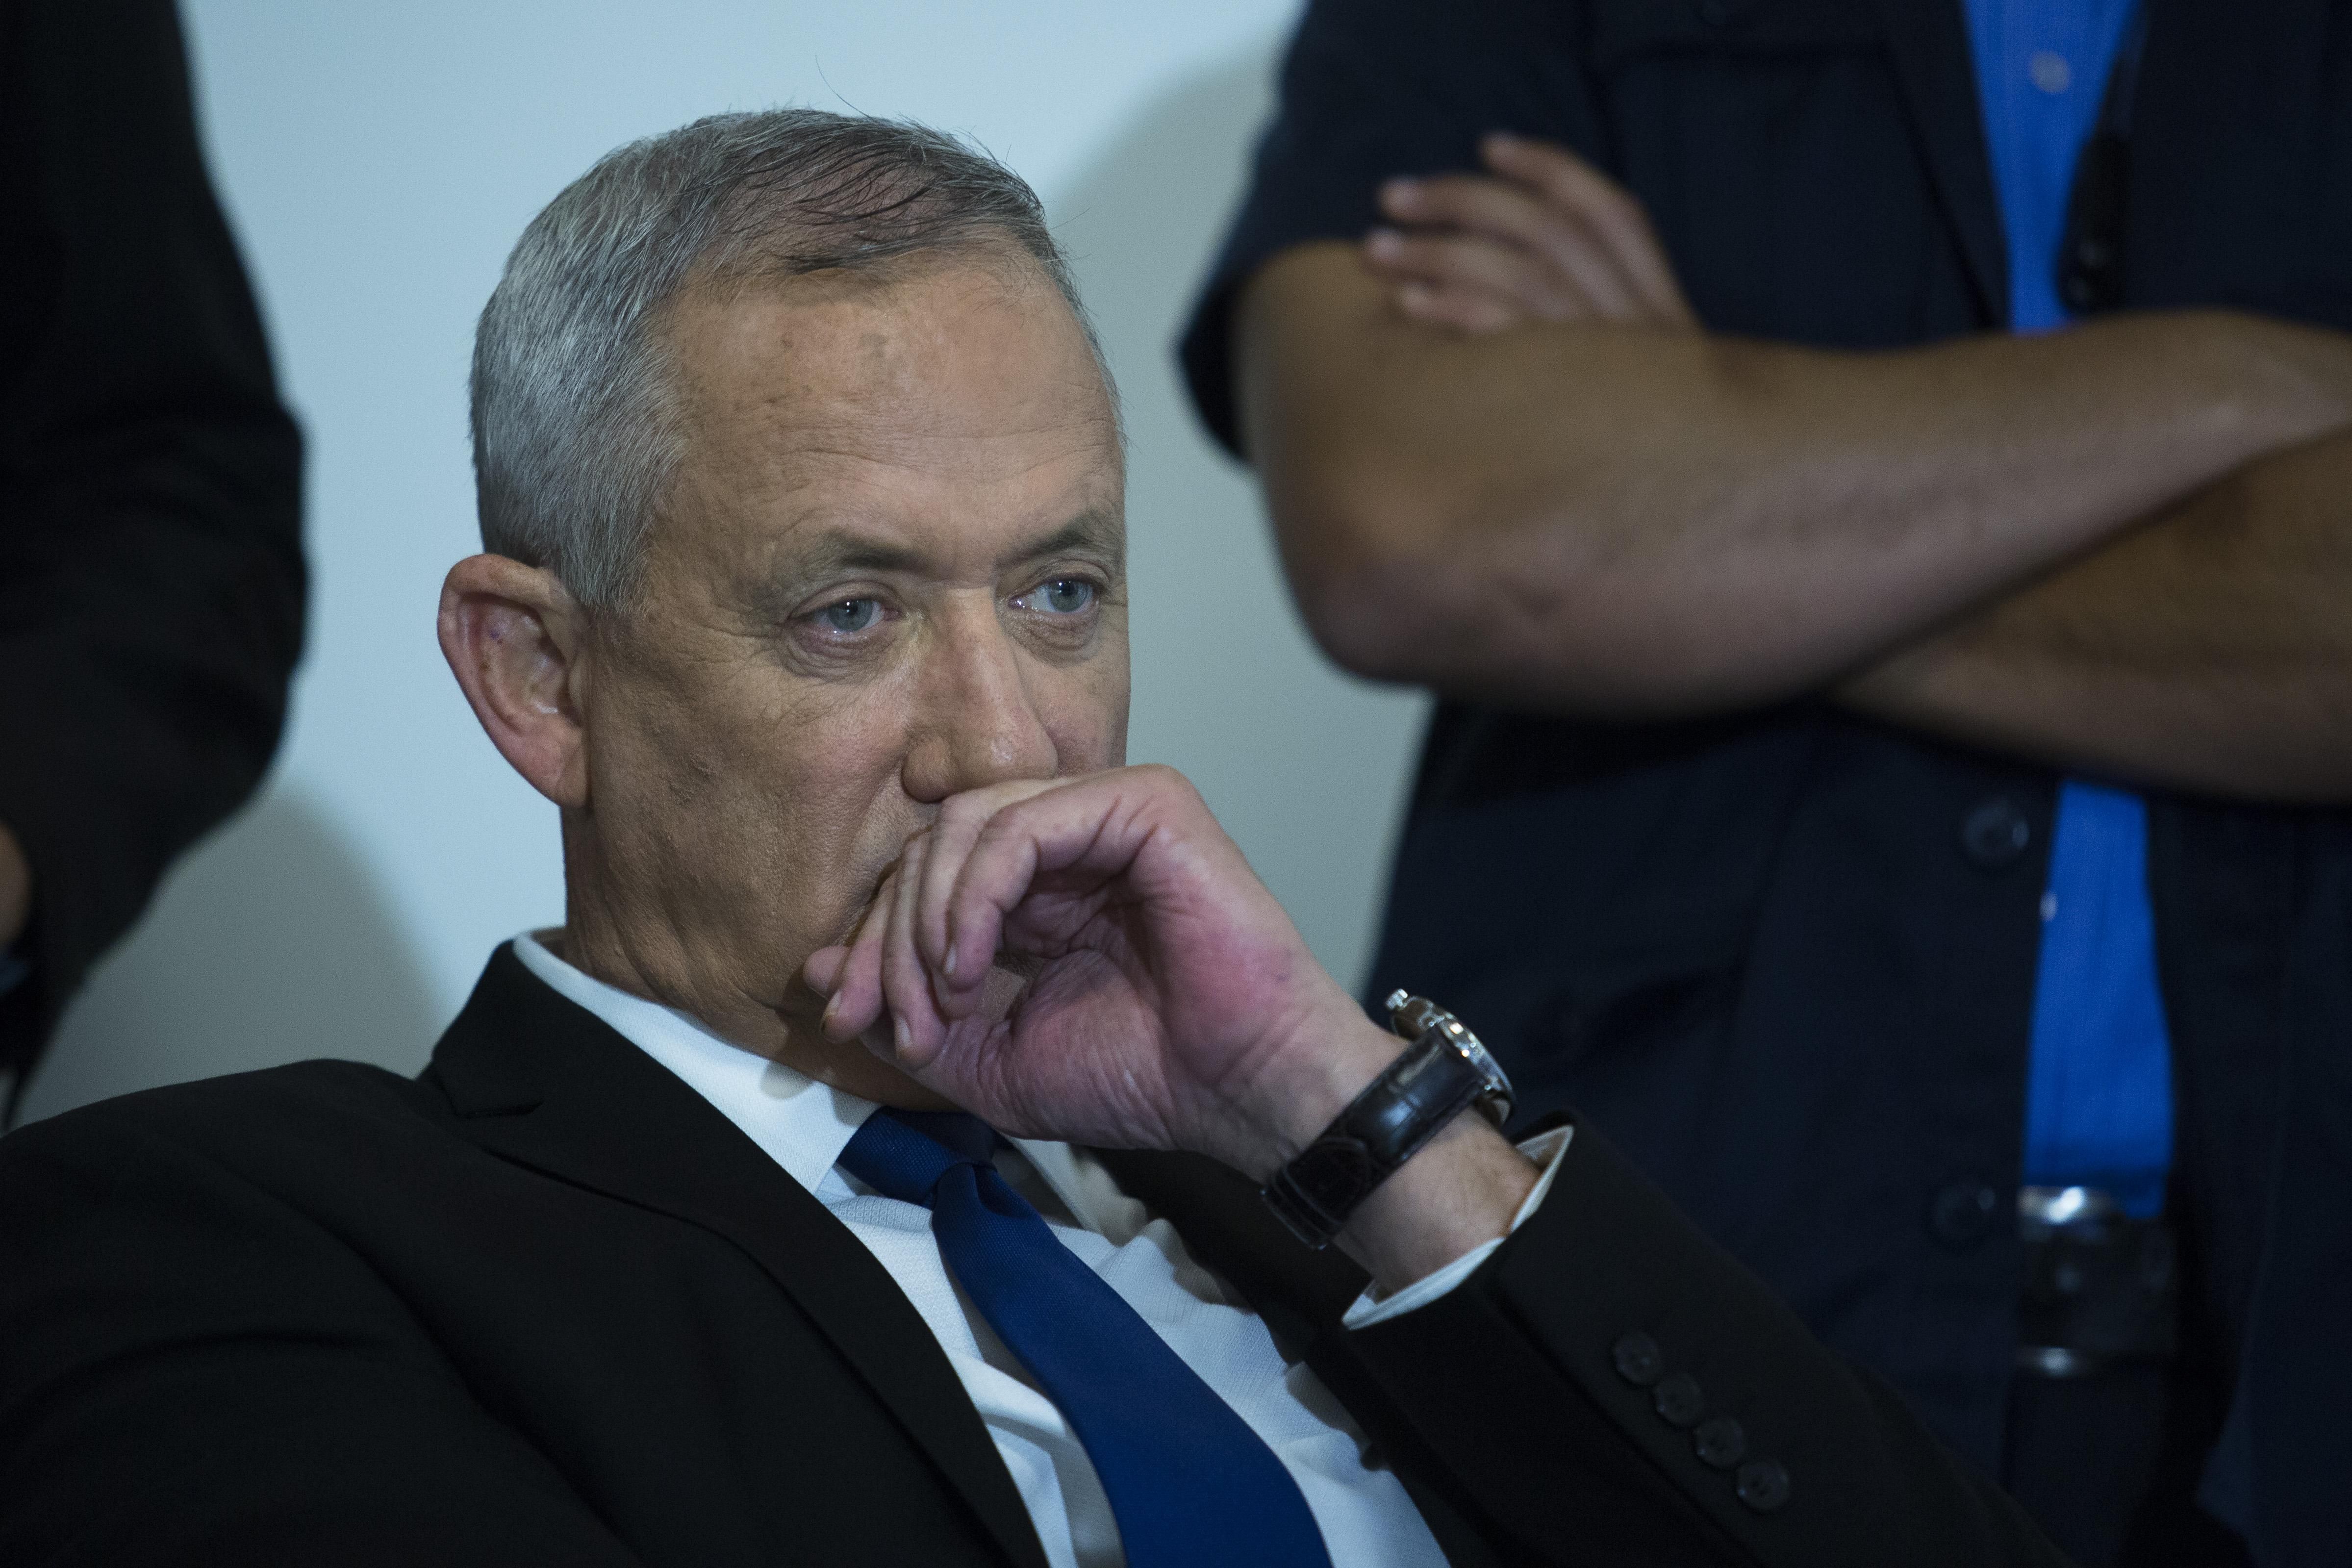 Gantz (pictured above) had recently boasted about sending "parts of Gaza back to the Stone Age." (Photo: Amir Levy/Getty Images)